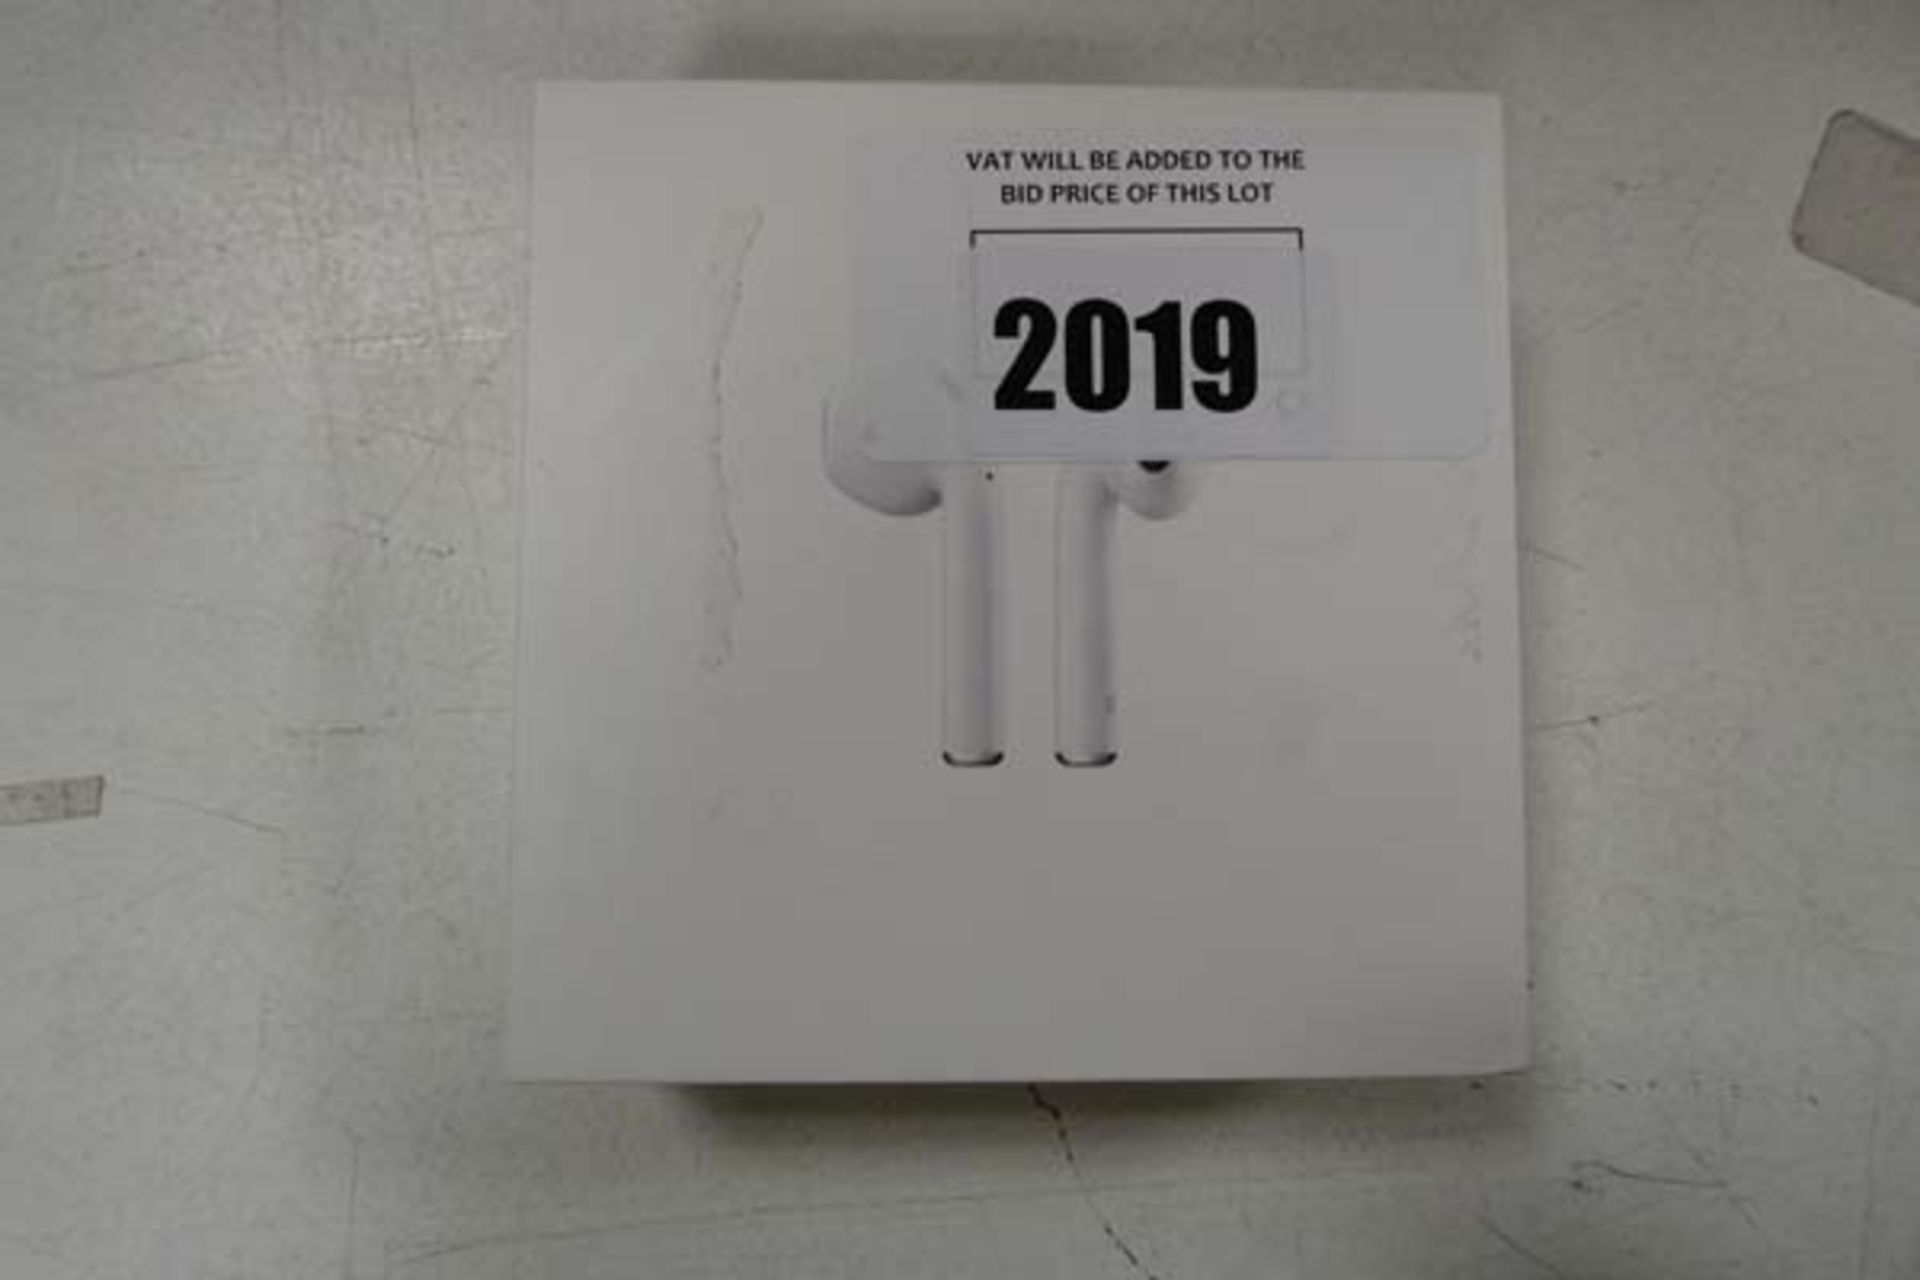 Pair of Apple AirPods 1st gen with wireless charging case and box - Image 2 of 2